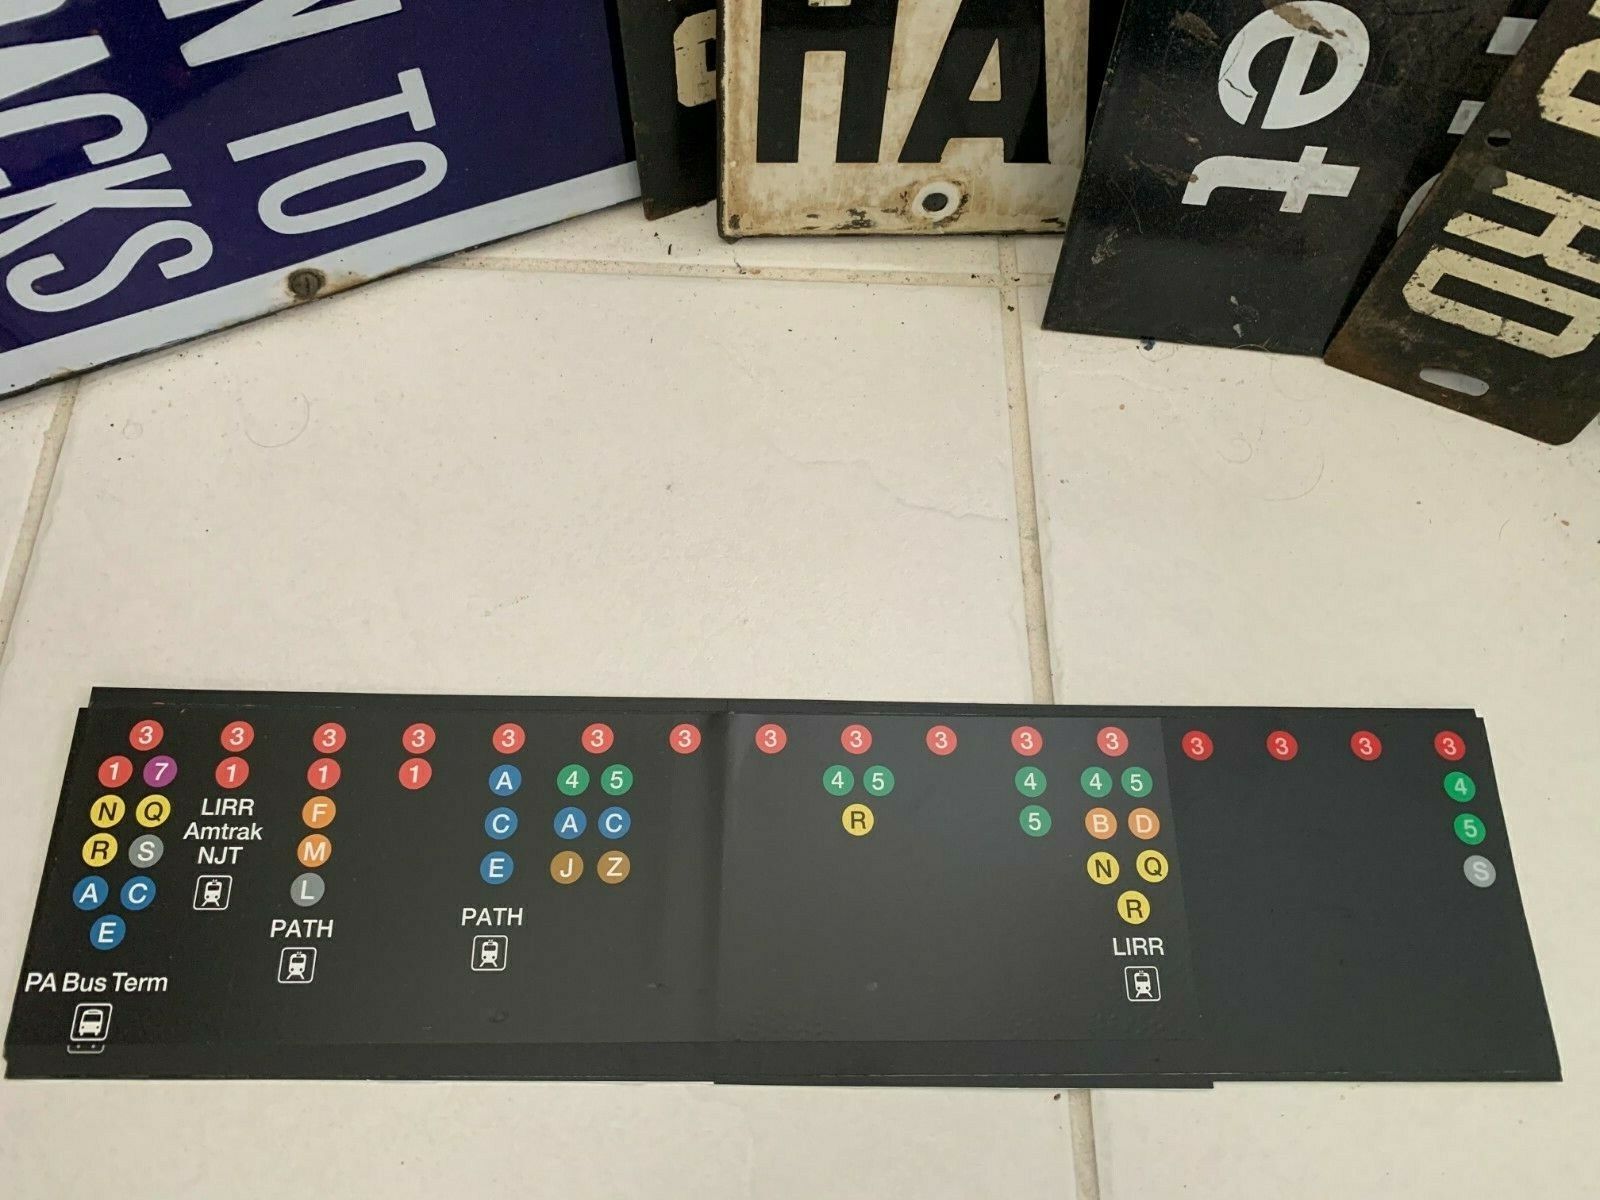 VINTAGE MTA TAPEOVER MYLAR SIGN LIRR PATH #1 #3 #7 #A #J #Z NY NYC SUBWAY LINES